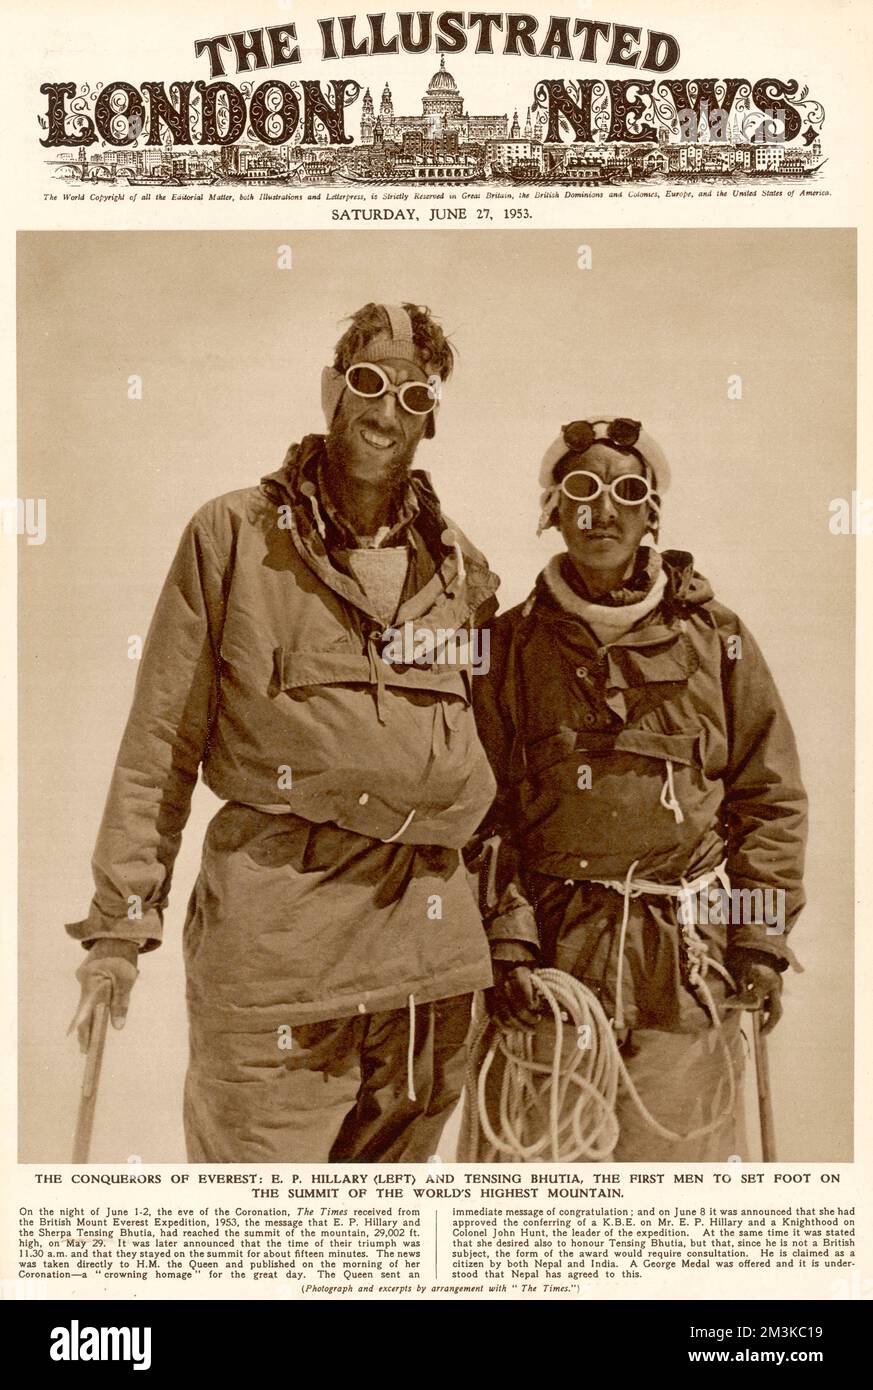 Front cover of The Illustrated London News showing Sir Edmund Hillary together with Sherpa Tensing Bhutia reaching the summit of Mount Everest on May 29 1953.      Date: 1953 Stock Photo